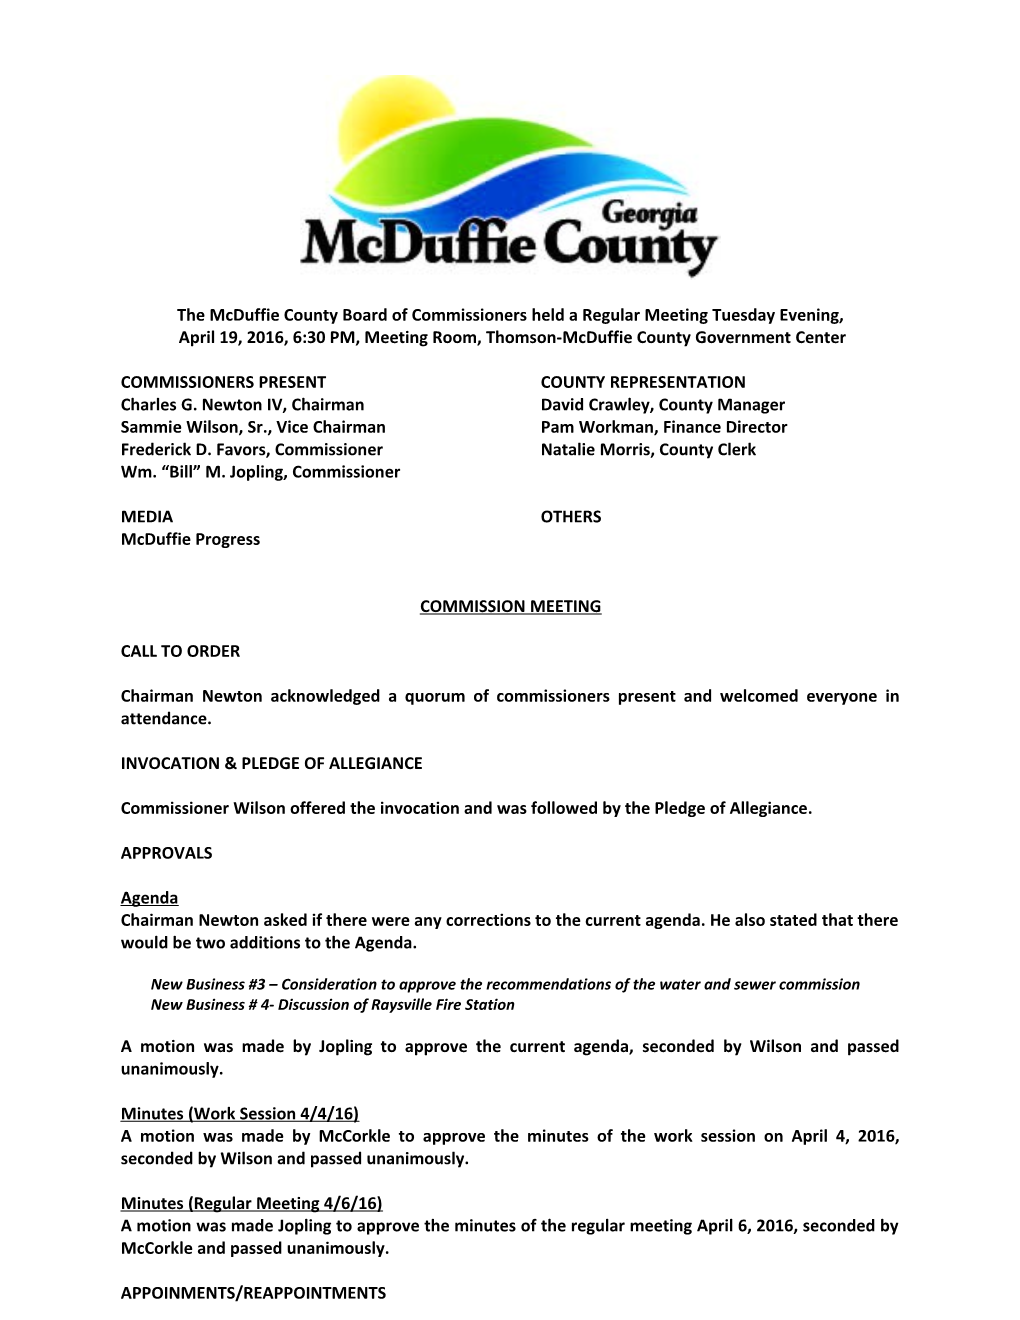 The Mcduffie County Board of Commissioners Held a Regular Meeting Tuesday Evening